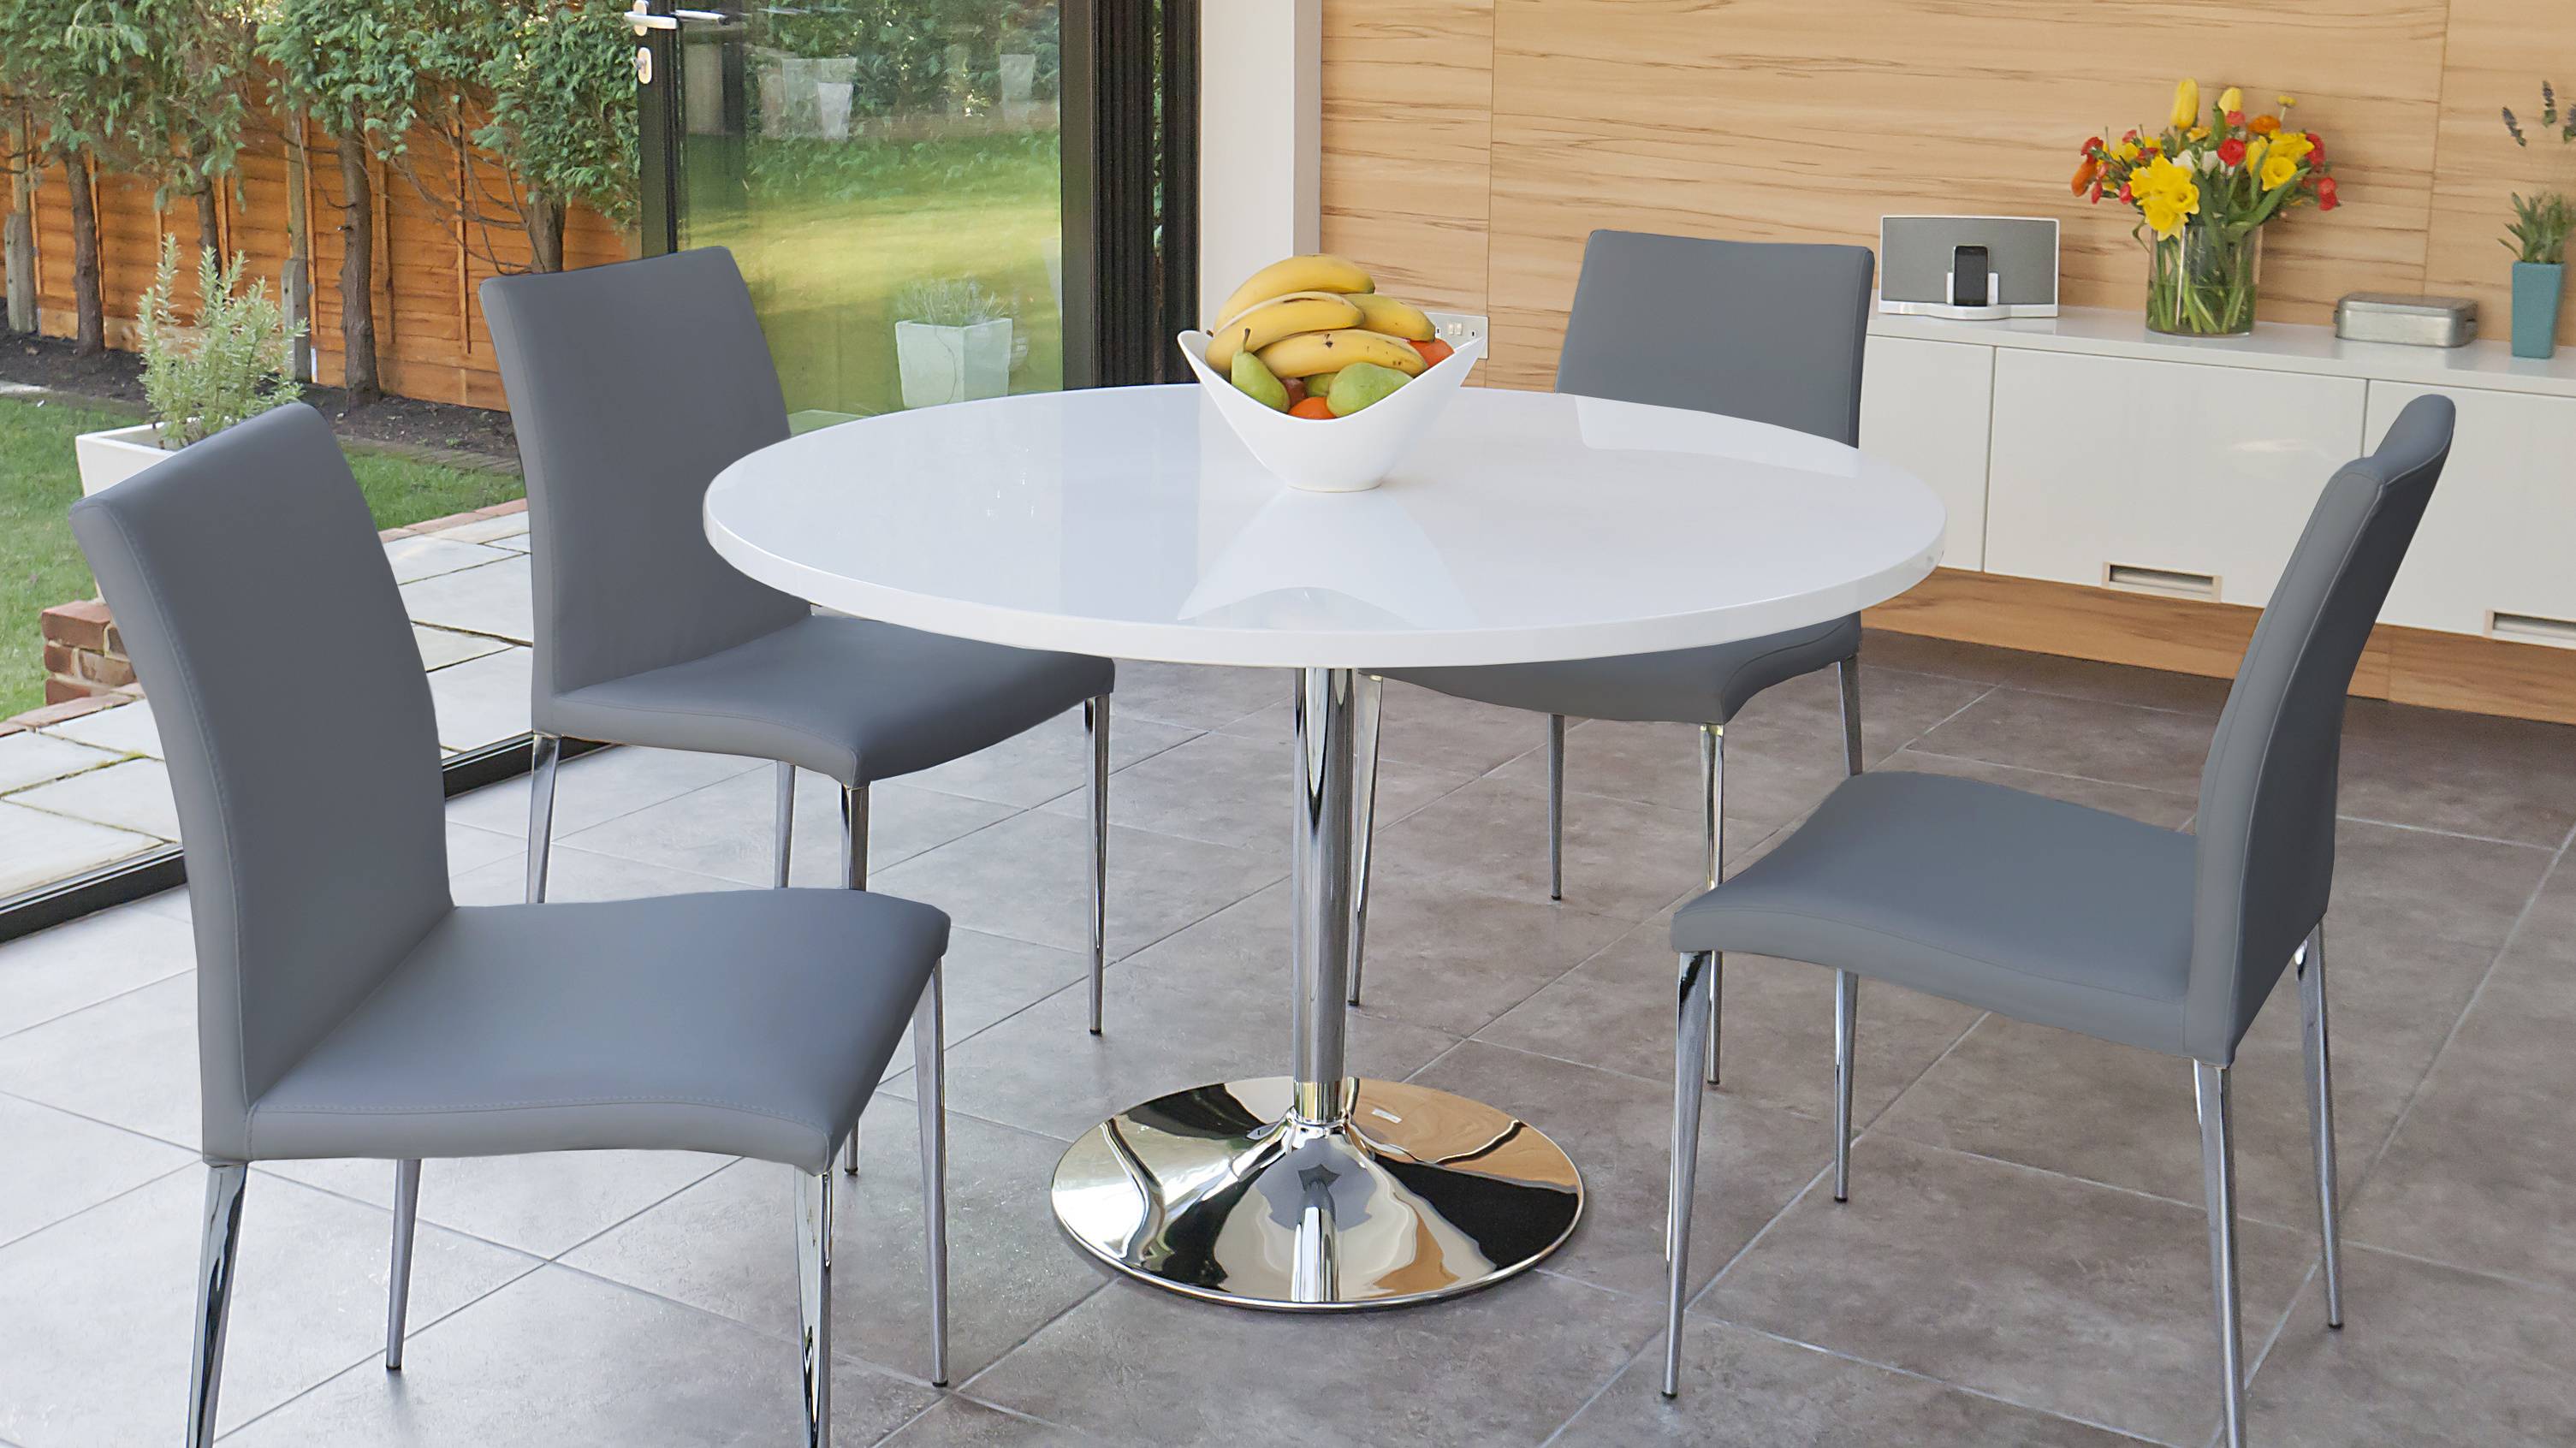 4 Seater White Gloss Dining Table and Grey Chairs